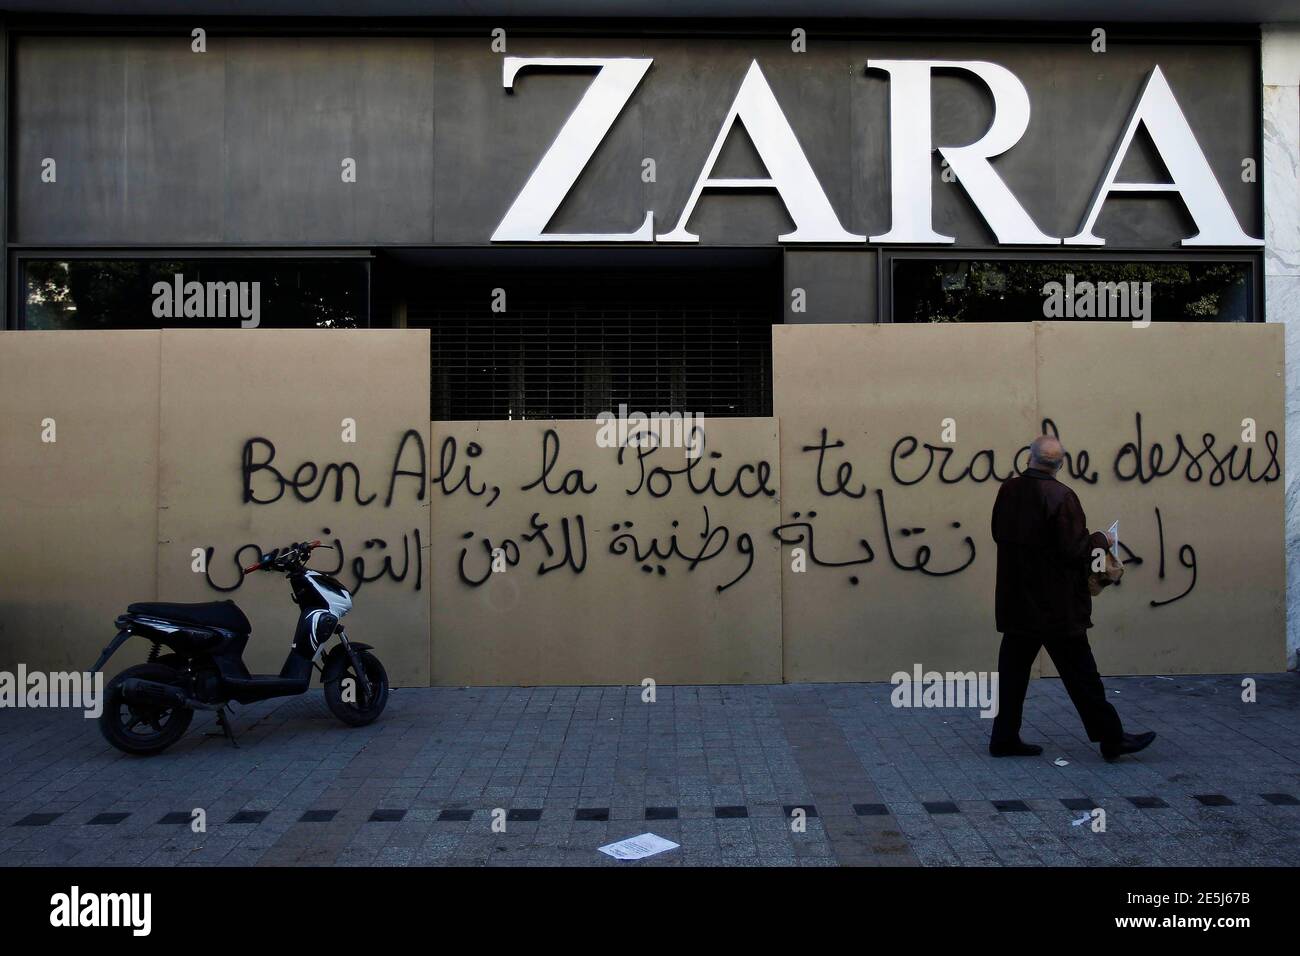 A man walks past a boarded up Zara shop with graffiti denouncing ousted  president Zine al-Abidine Ben Ali, in downtown Tunis, January 23, 2011.  Protesters from Tunisia's poor rural heartlands demonstrated in